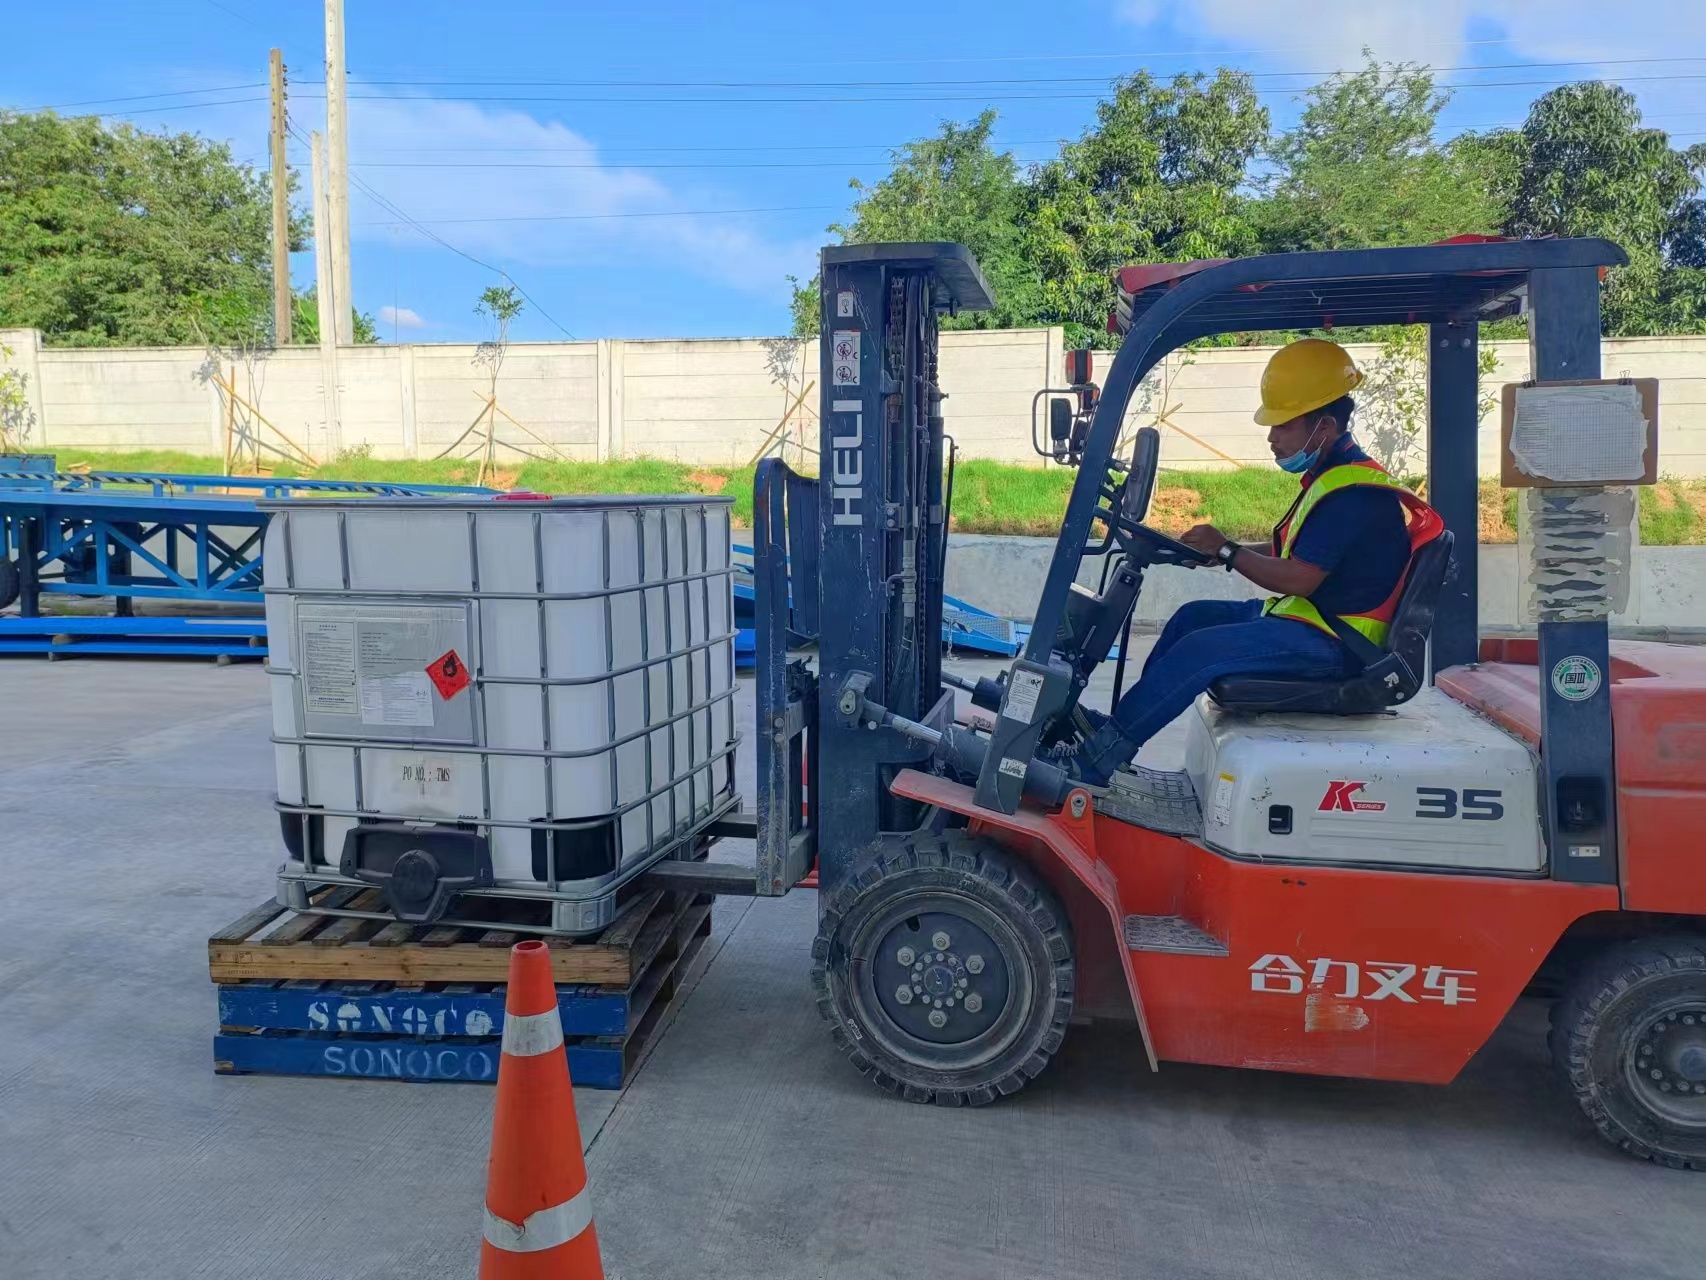 Taimei stone’s Forklift Safety Training